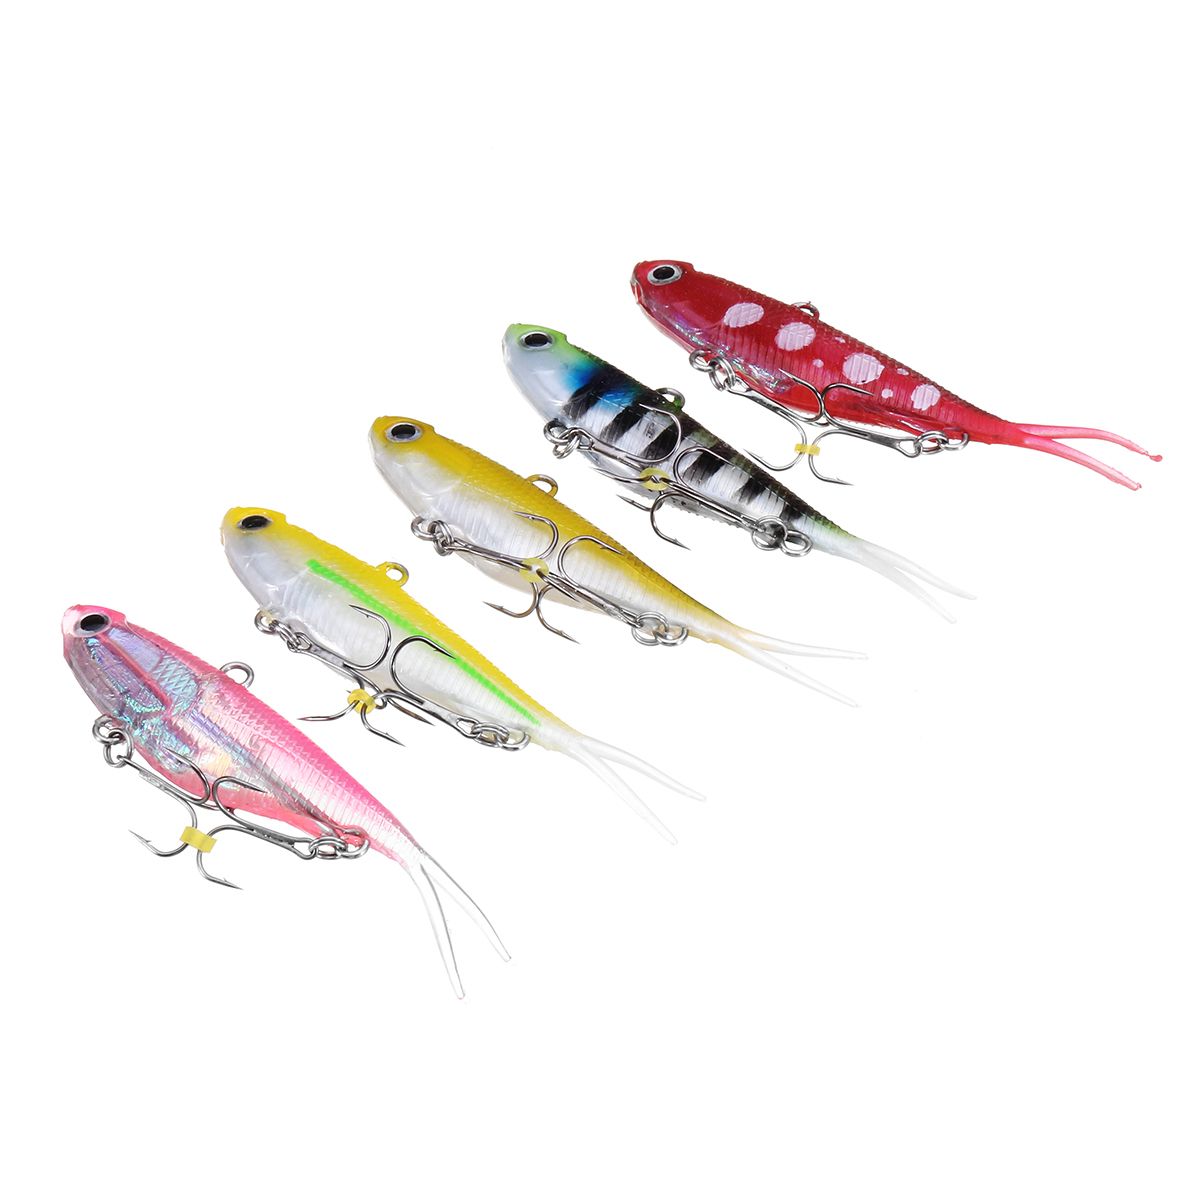 5PcsSet-95cm-Fishing-Lure-Spinners-Plugs-Spoons-Soft-Bait-Pike-Bream-1553559